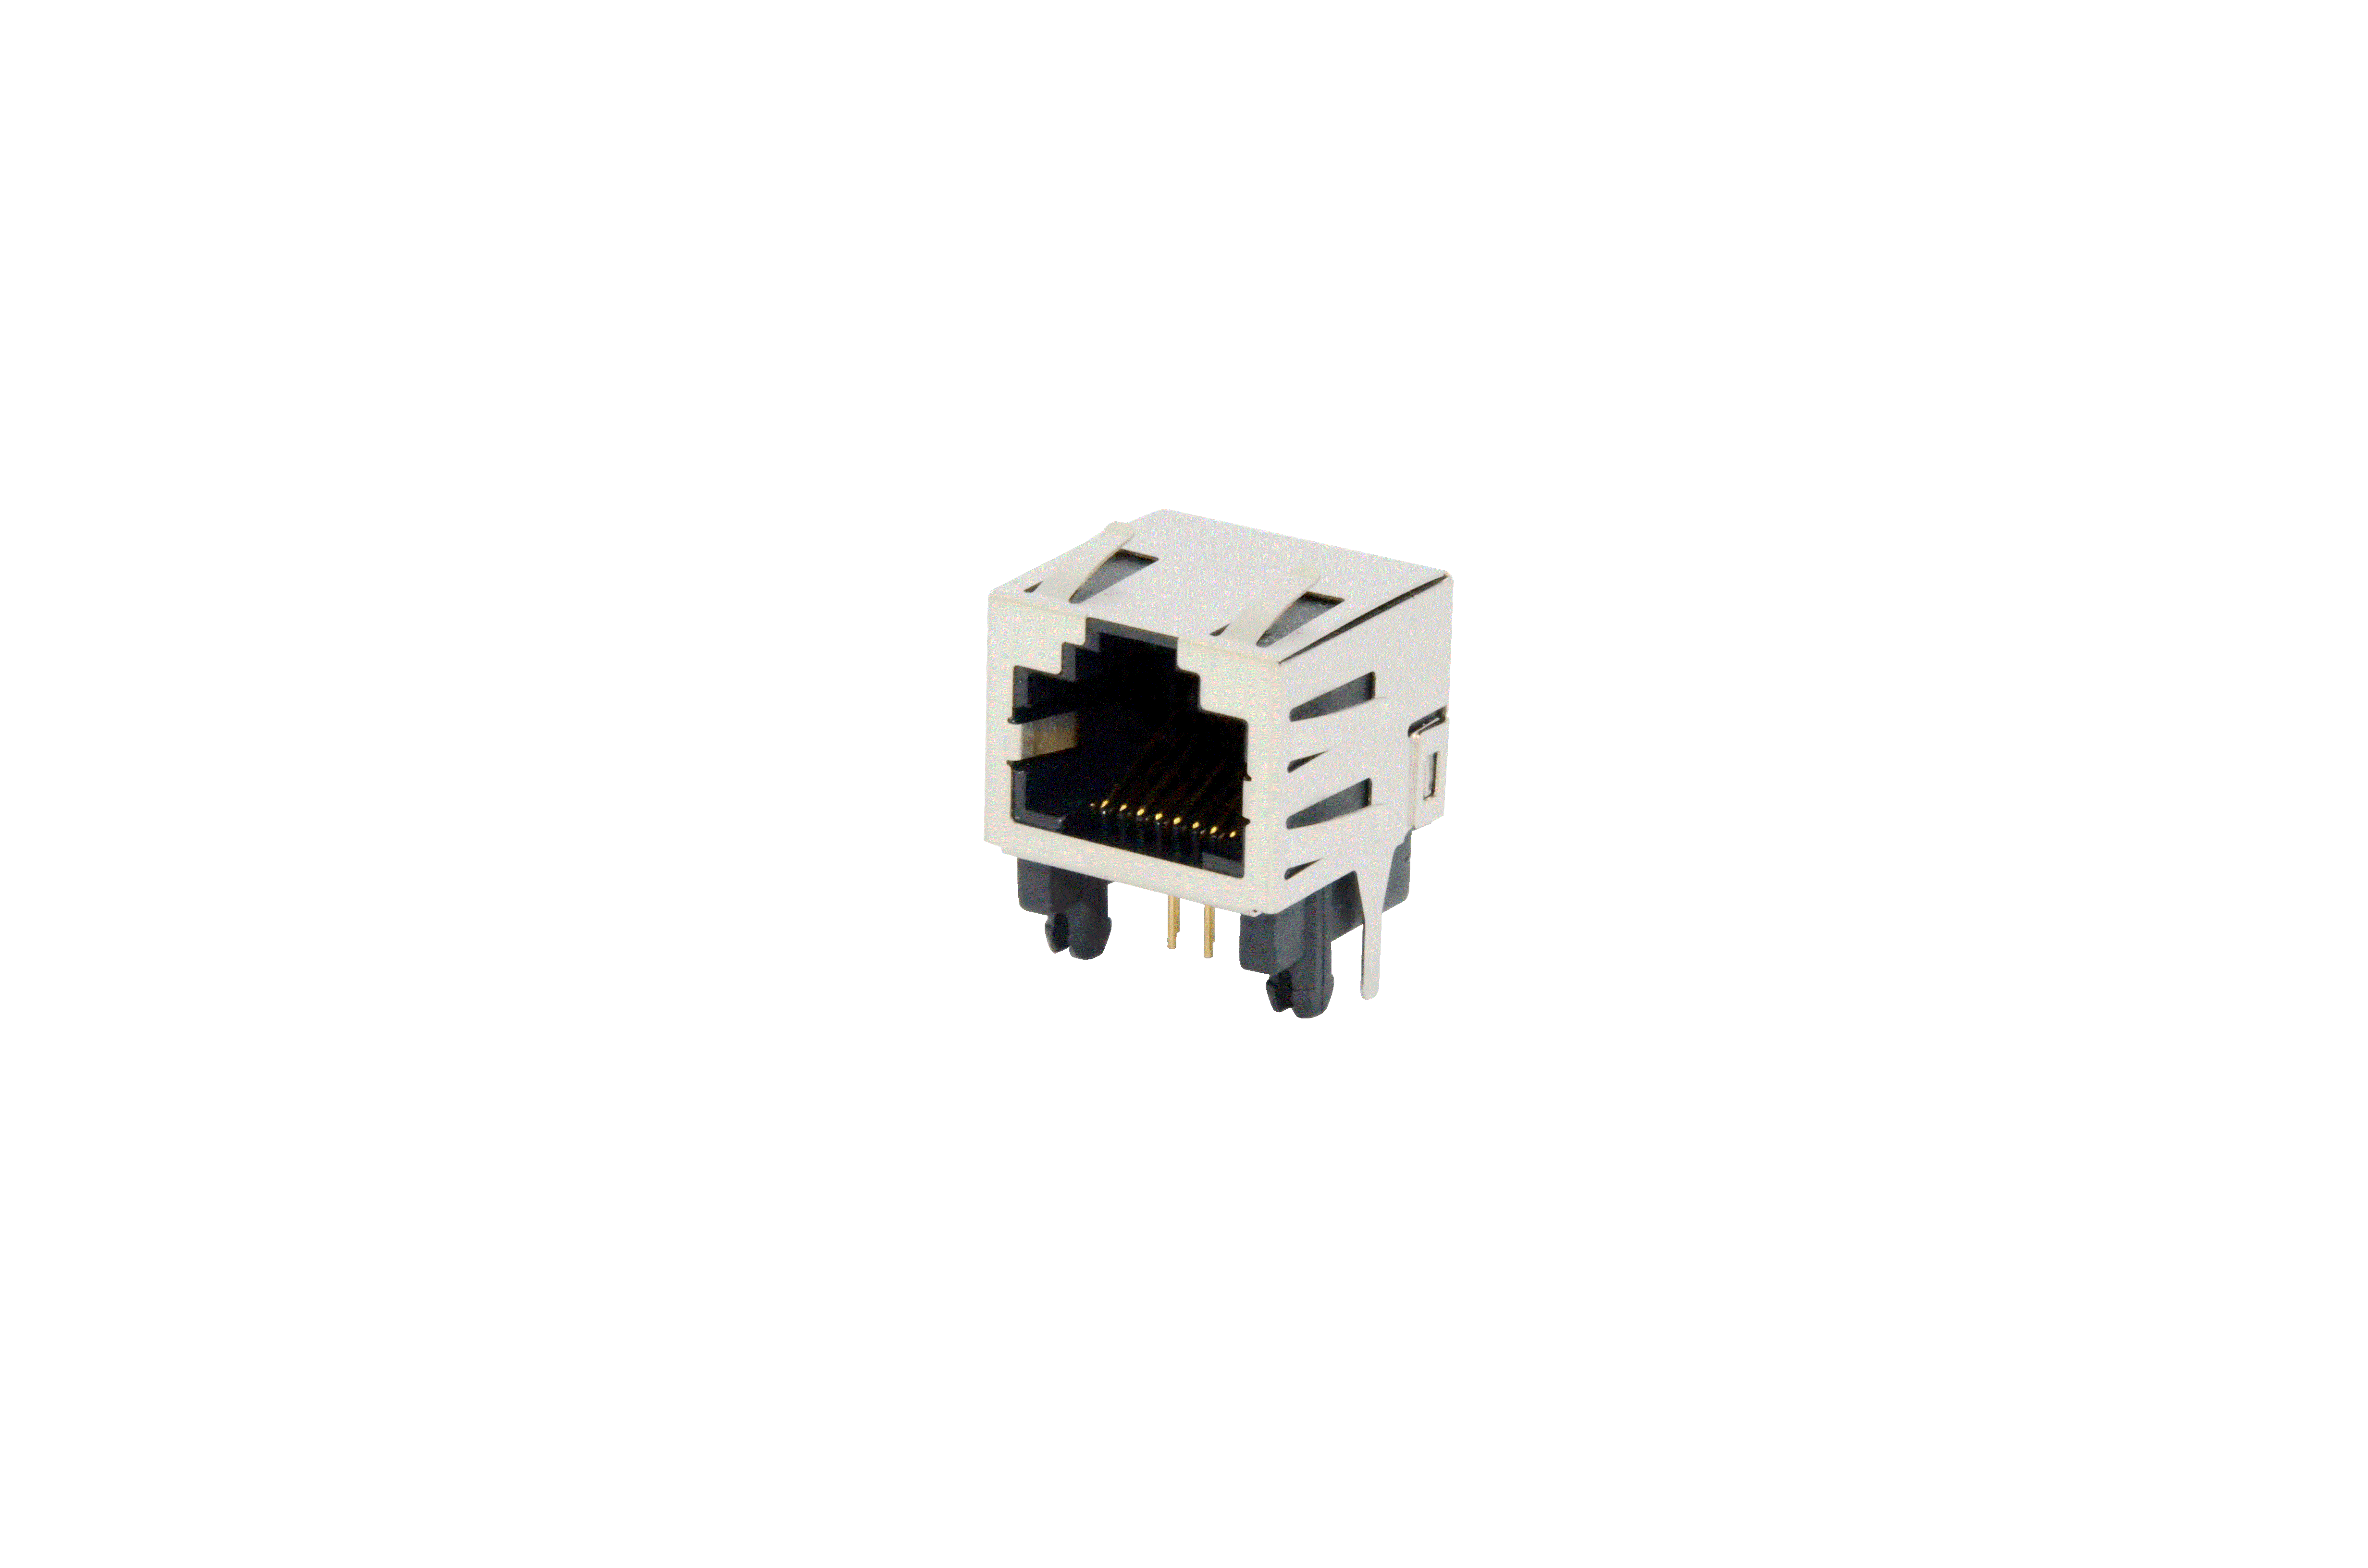 347 RJ45 RA TAB UP TH Helghten TOP Type Select Item shell & LED